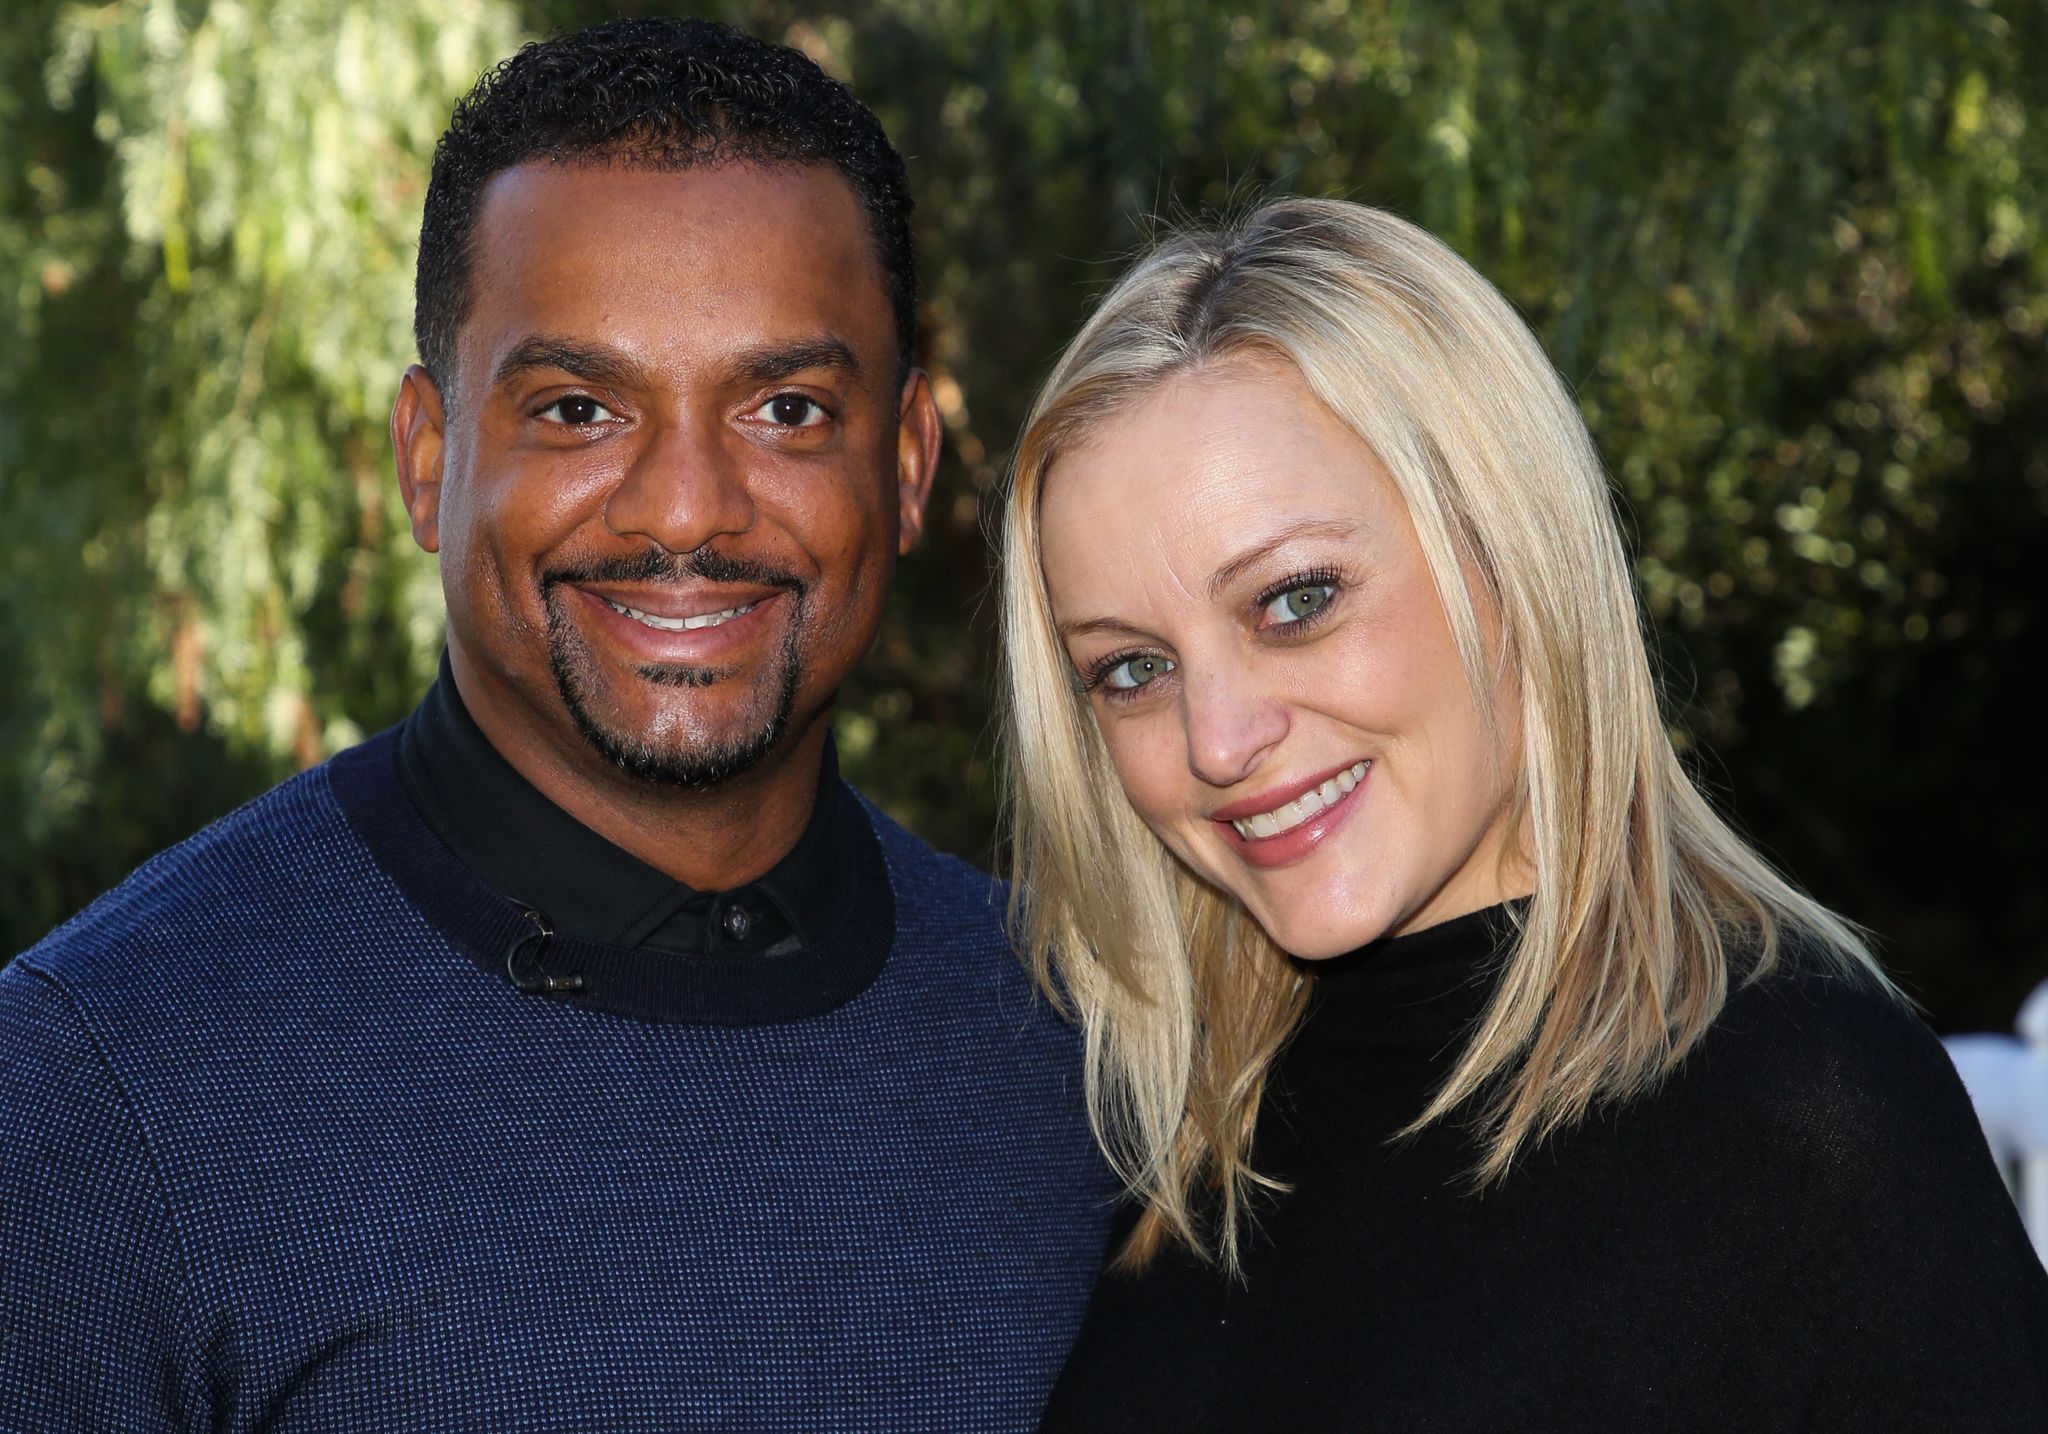 Alfonso Ribeiro and his wife Angela Unkrich Ribeiro at Hallmark's "Home & Family" on December 15, 2018 in Universal City, California | Photo: Getty Images